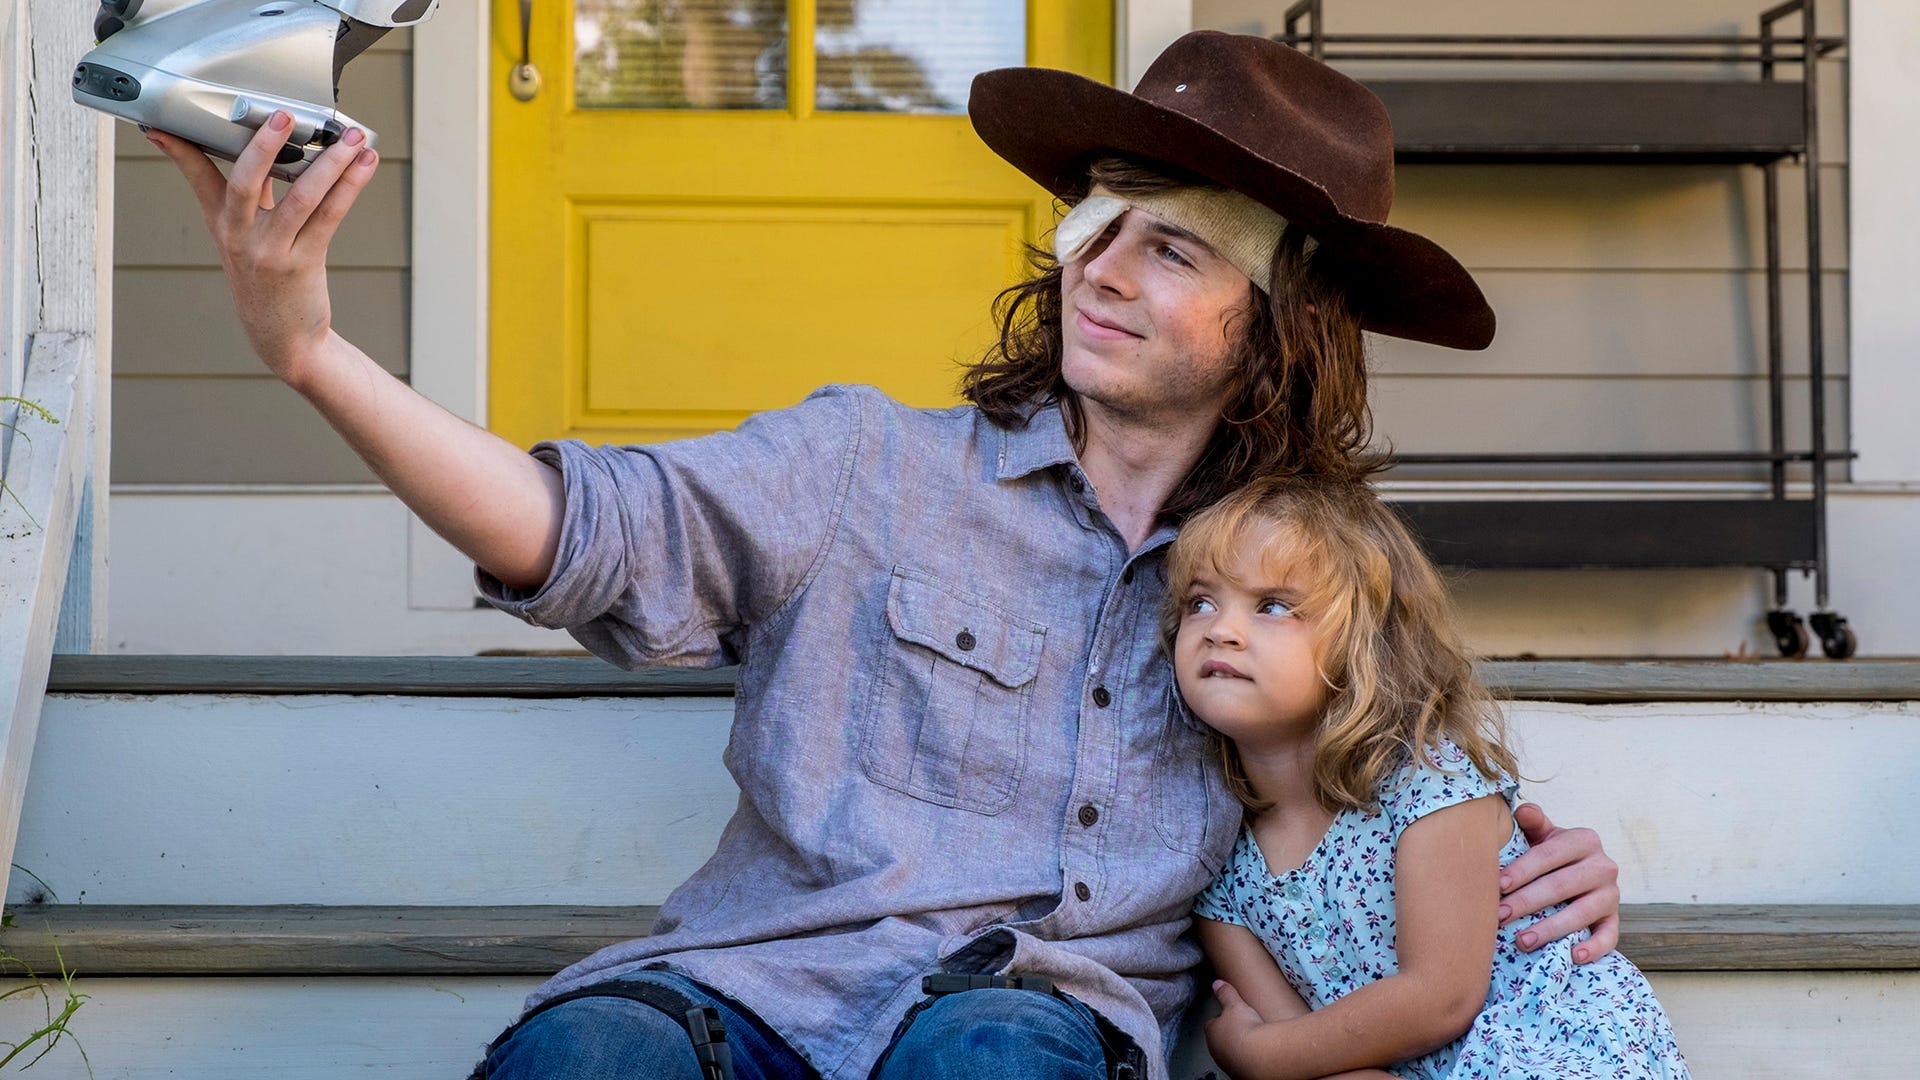 Chandler Riggs, The Walking Dead